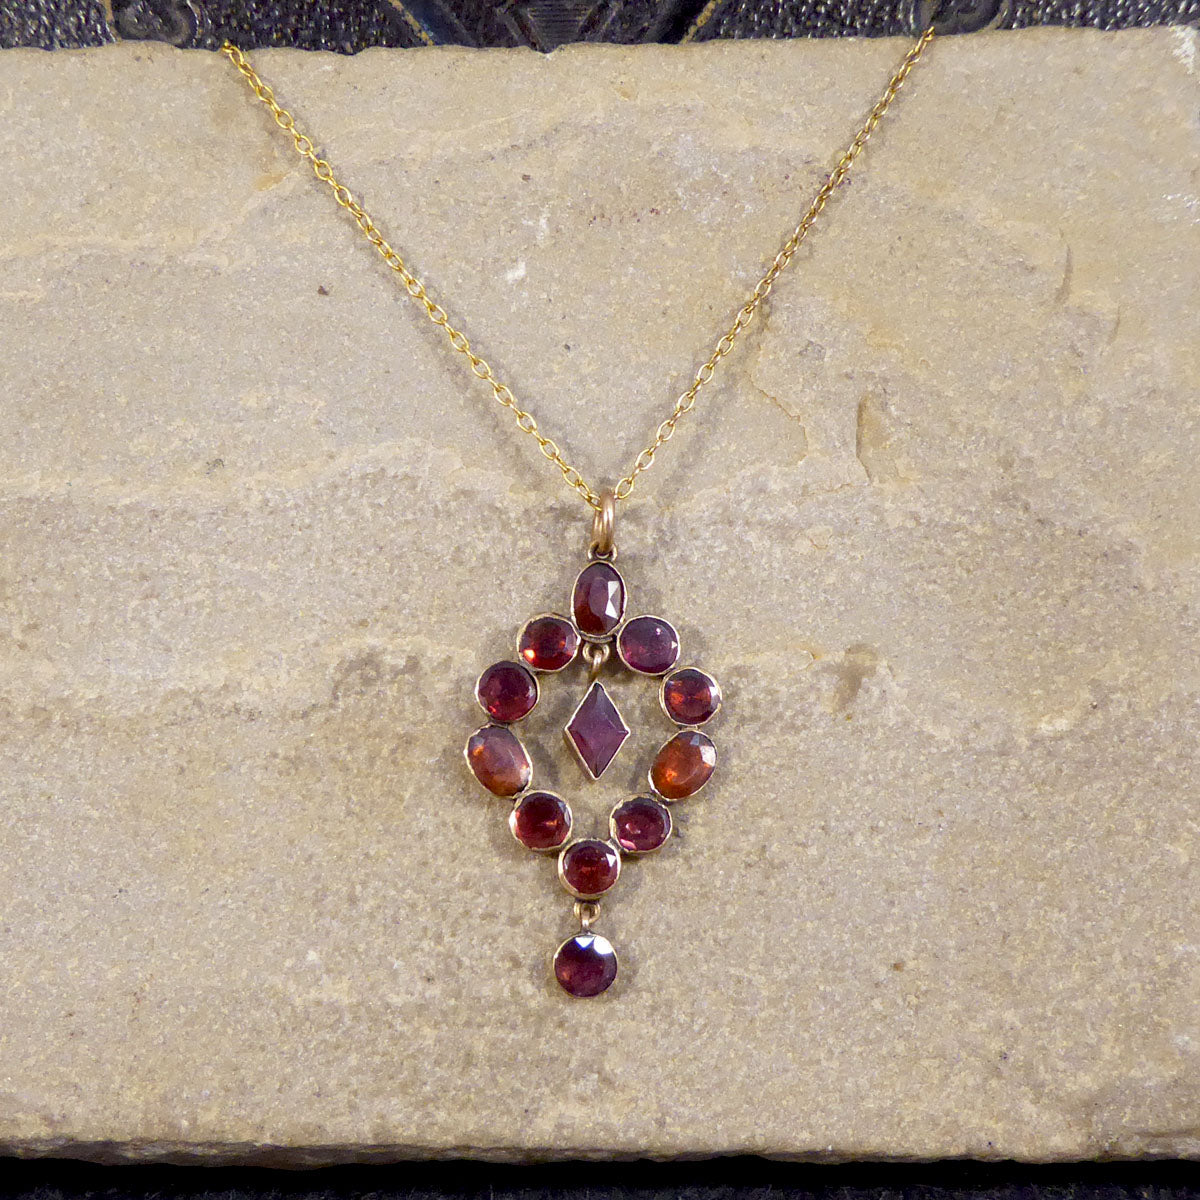 Antique Georgian Foiled Closed Back Garnet Drop Pendant Necklace in 9ct Yellow Gold